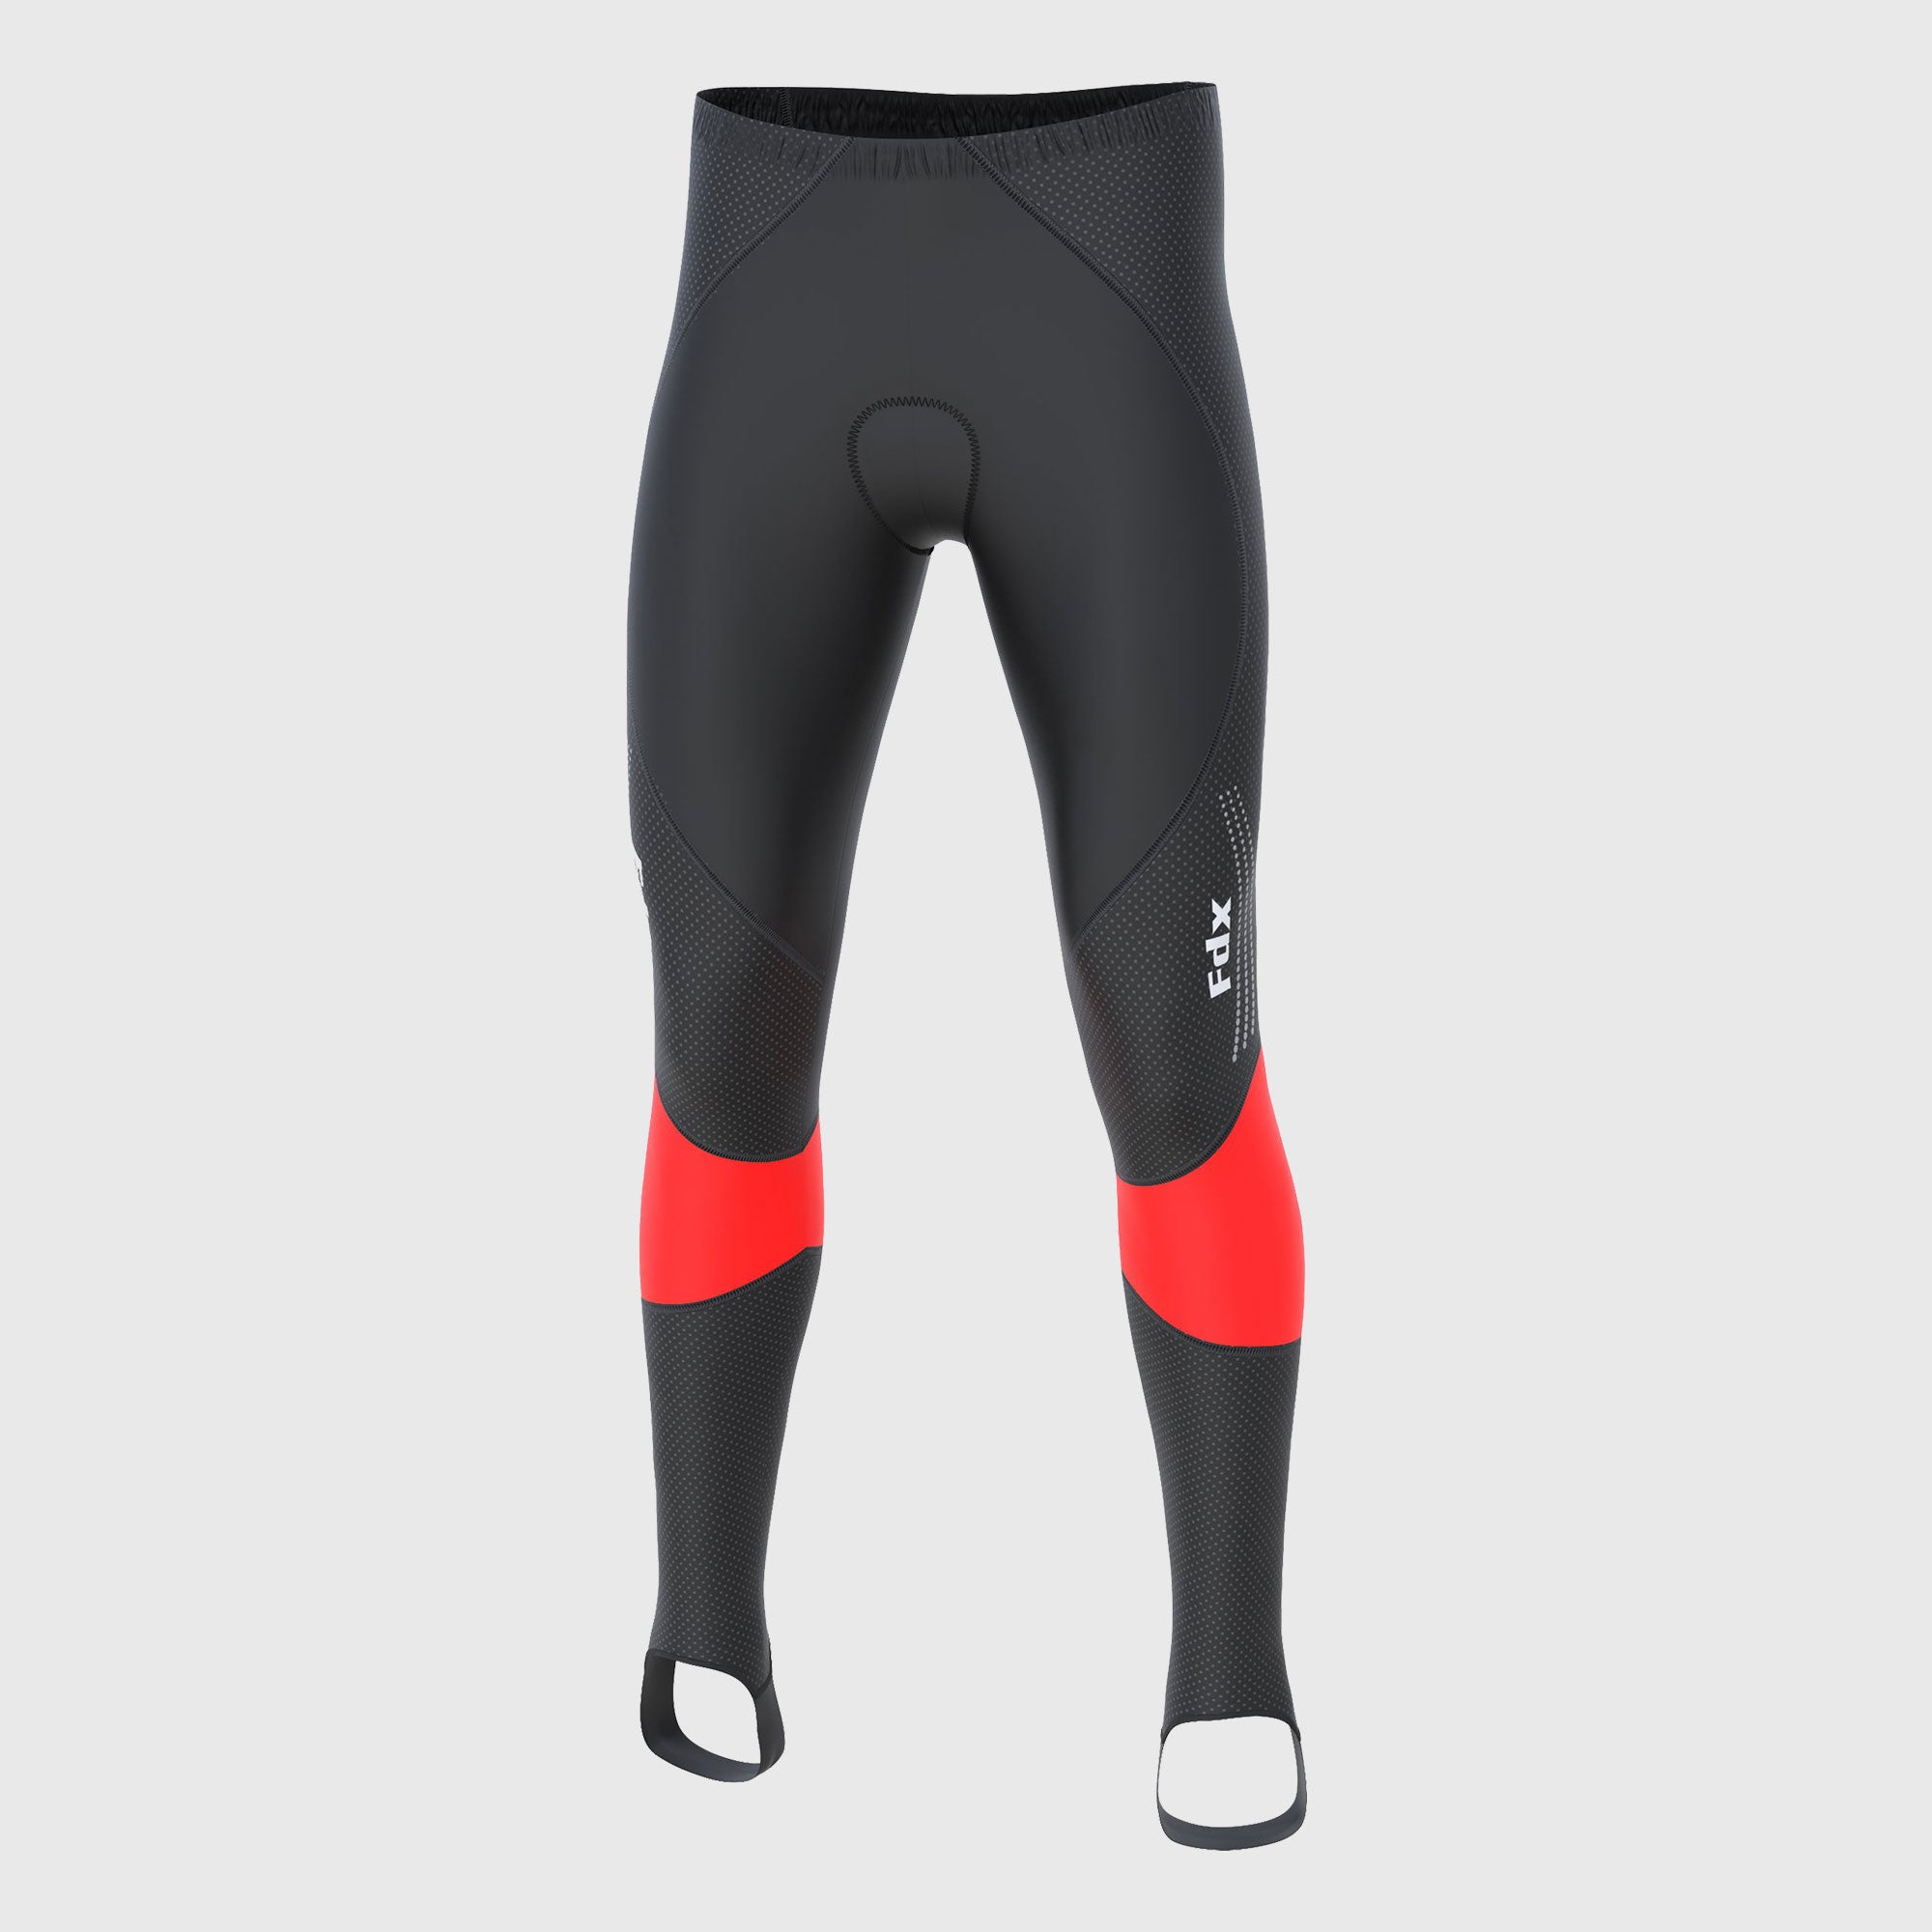 Fdx Thermodream Men's Padded Winter Cycling Tights Grey, Red